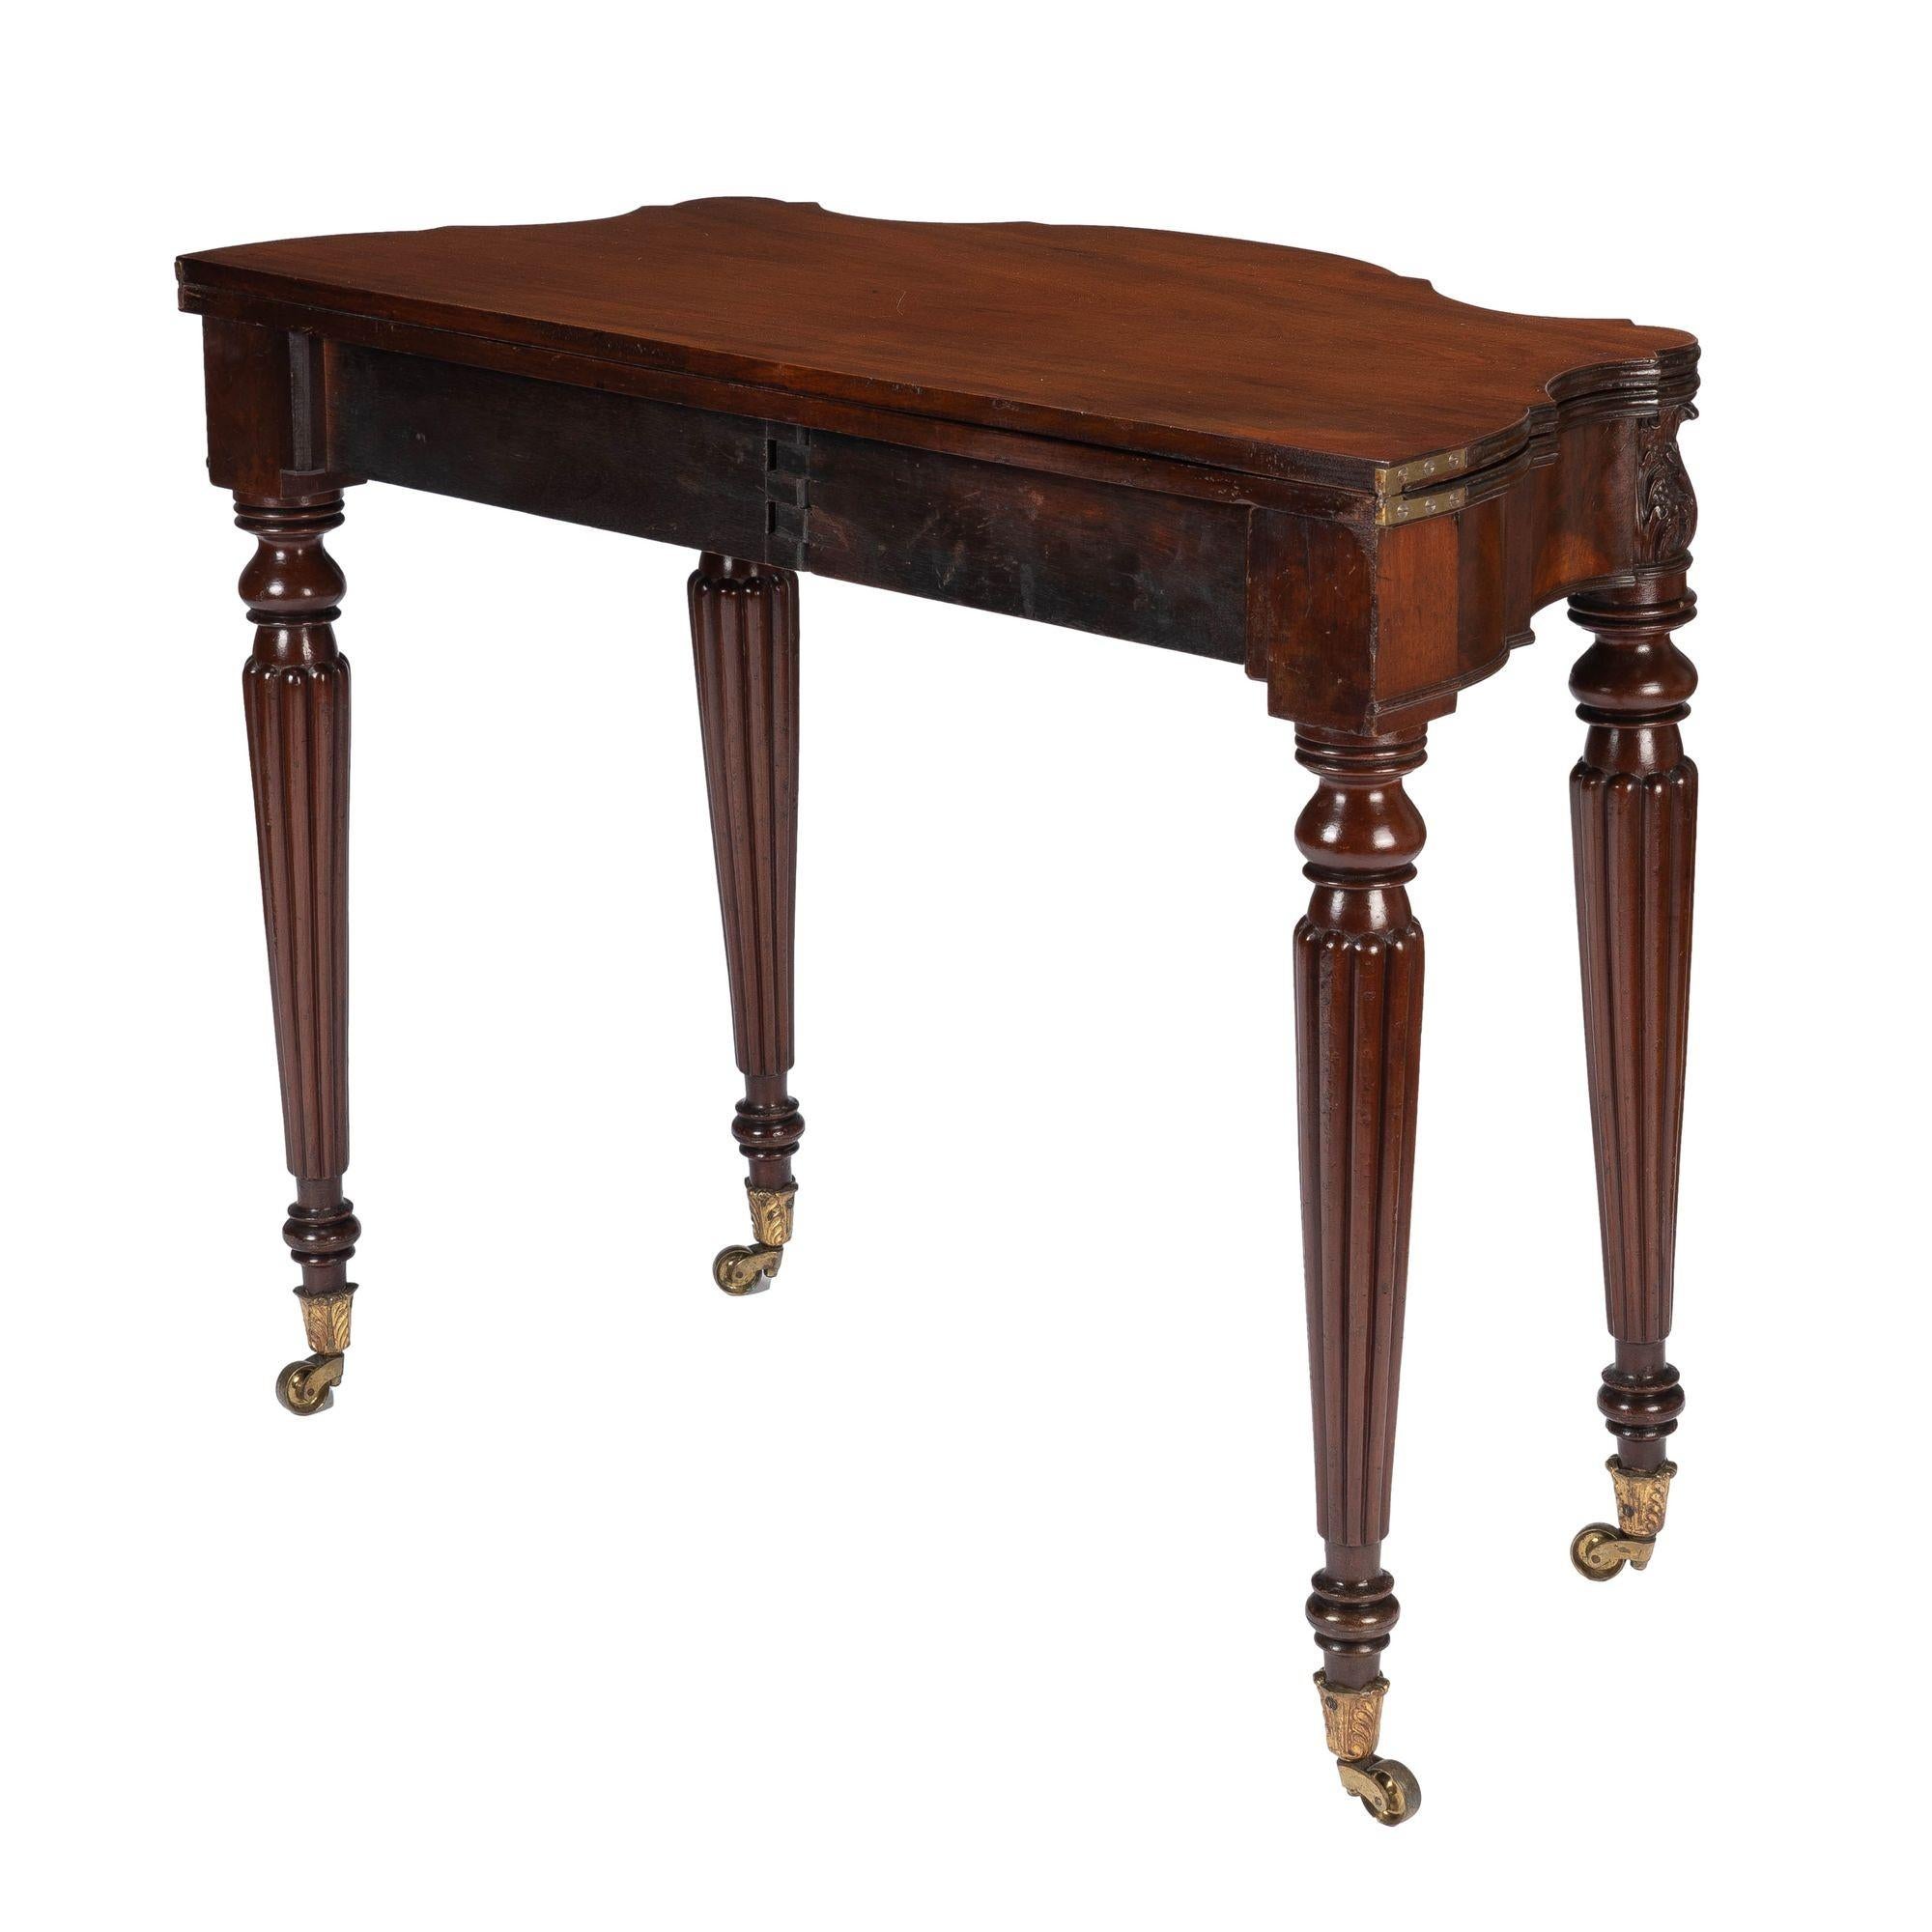 Brass Samuel Field Macintire Attributed Mahogany Flip Top Game Table, c. 1810-15 For Sale